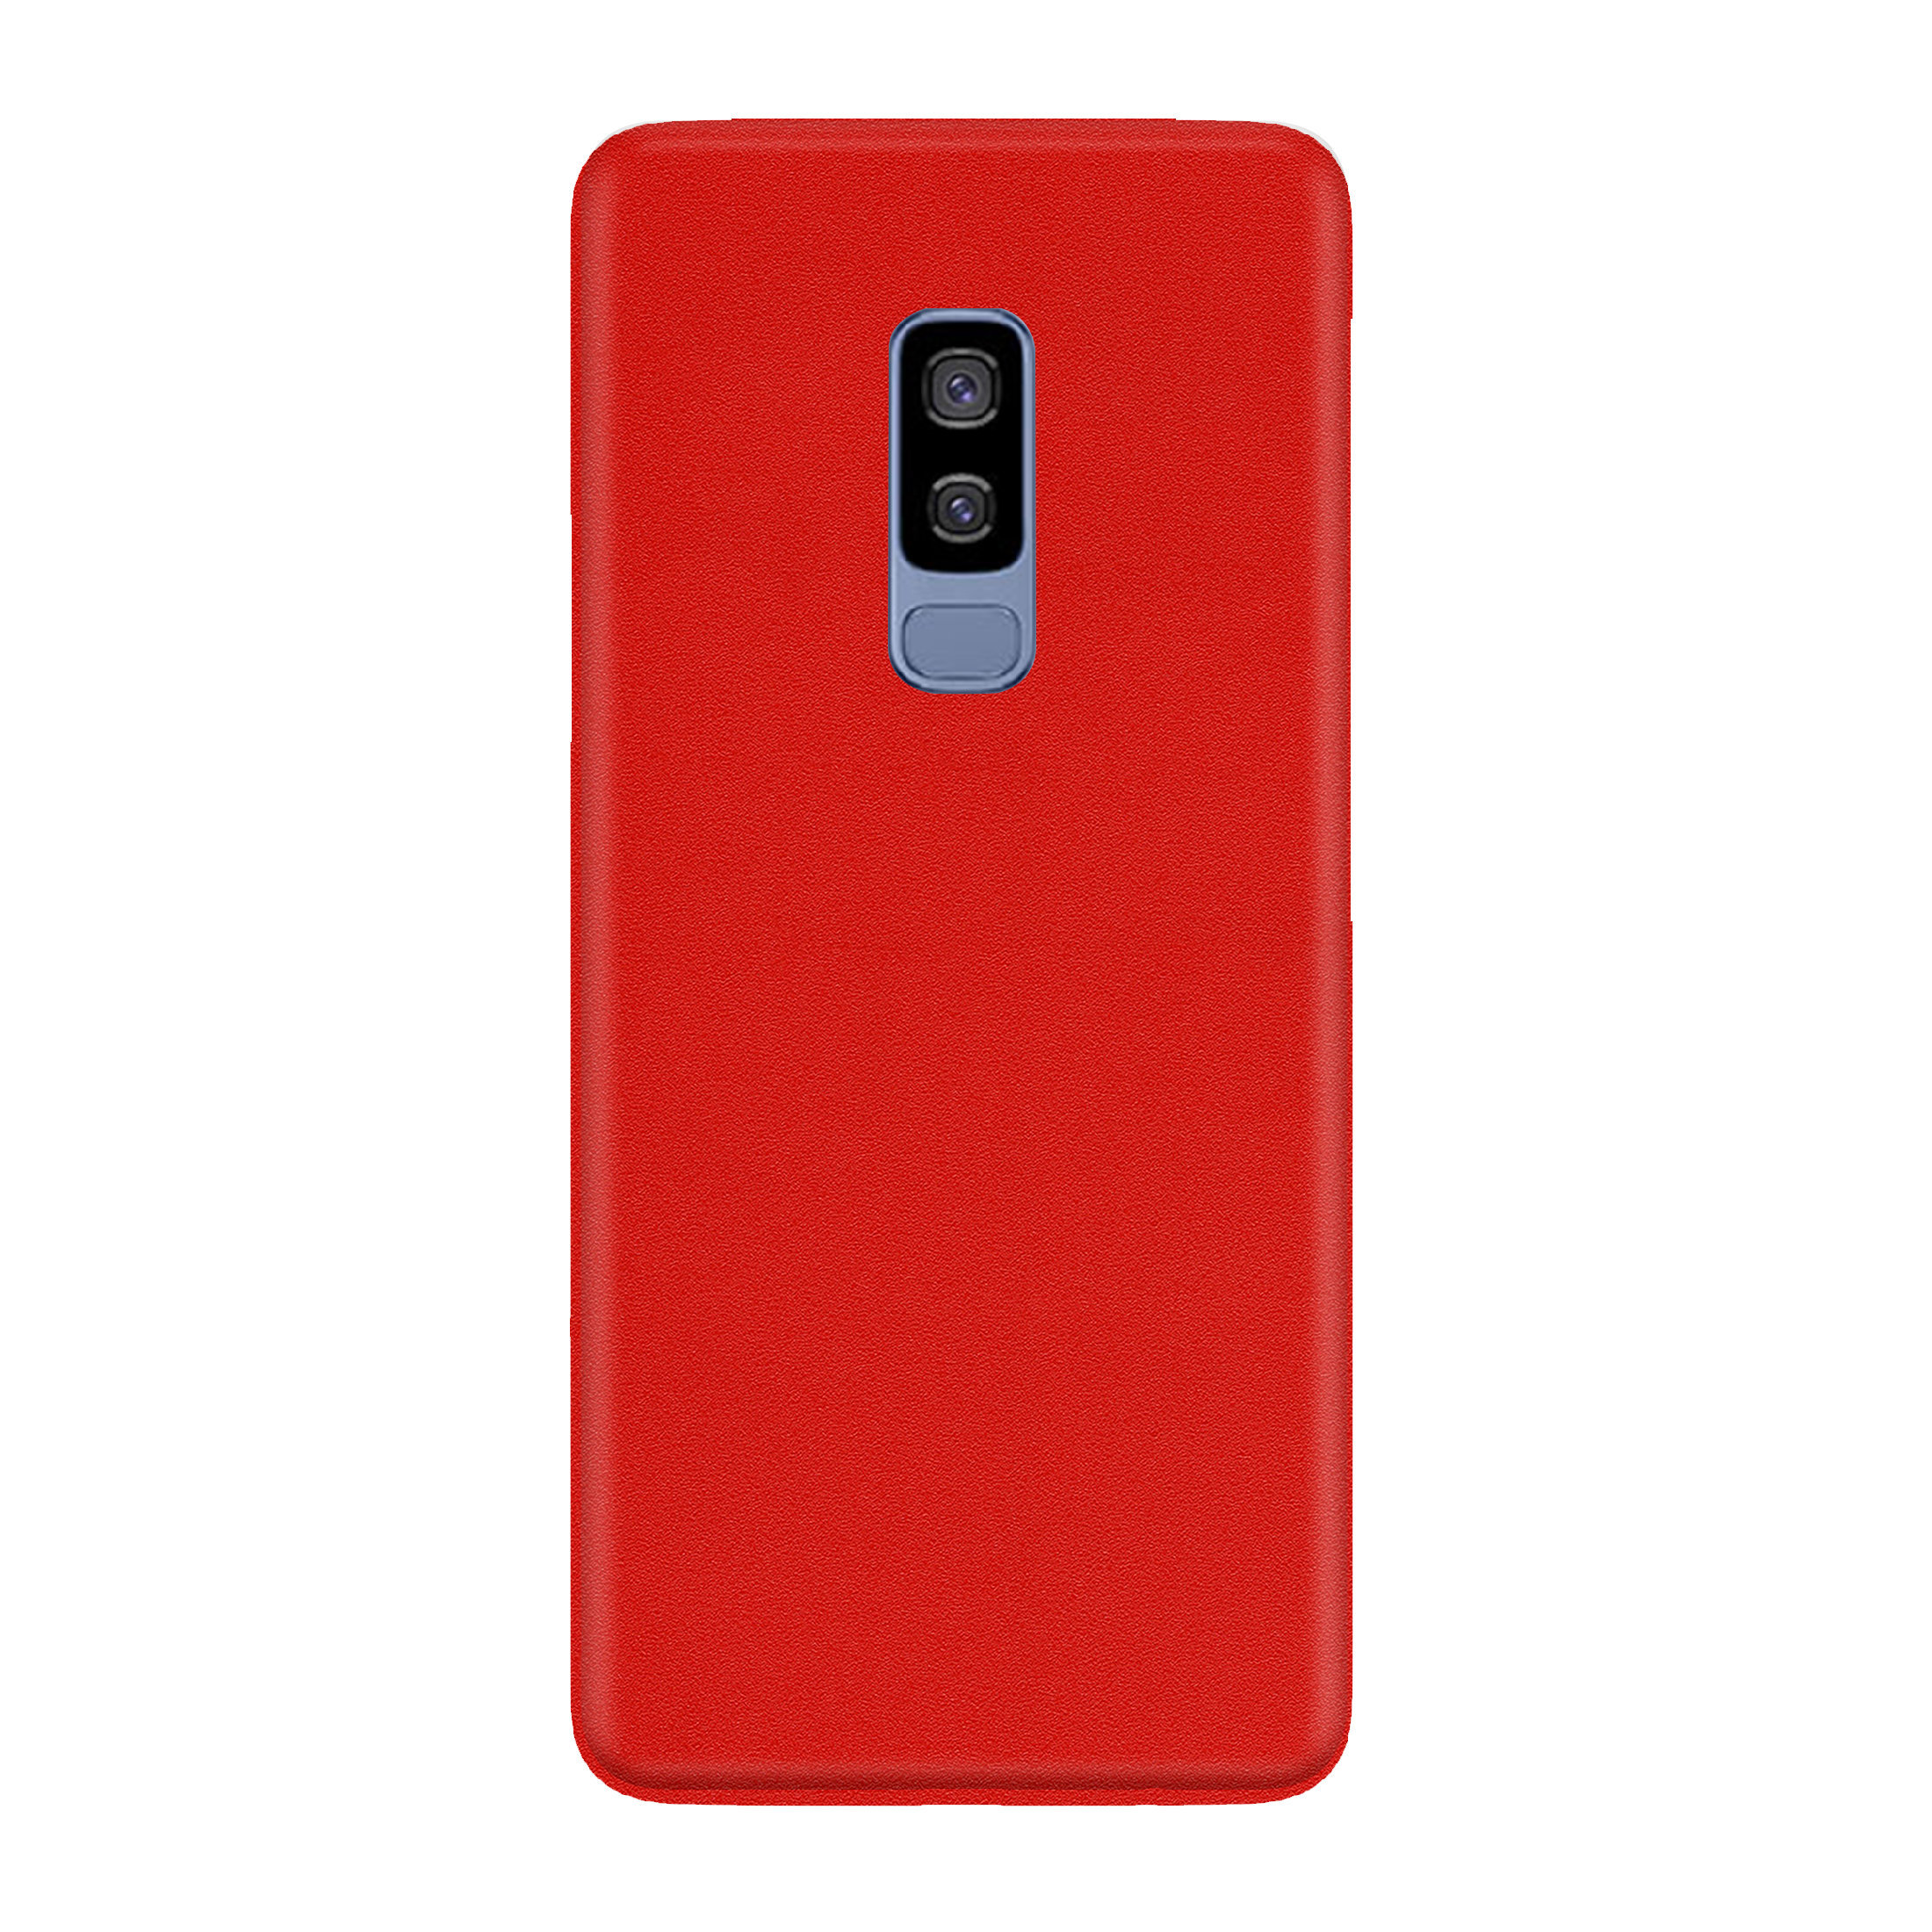 Dot Red Skin for Samsung S9 Plus